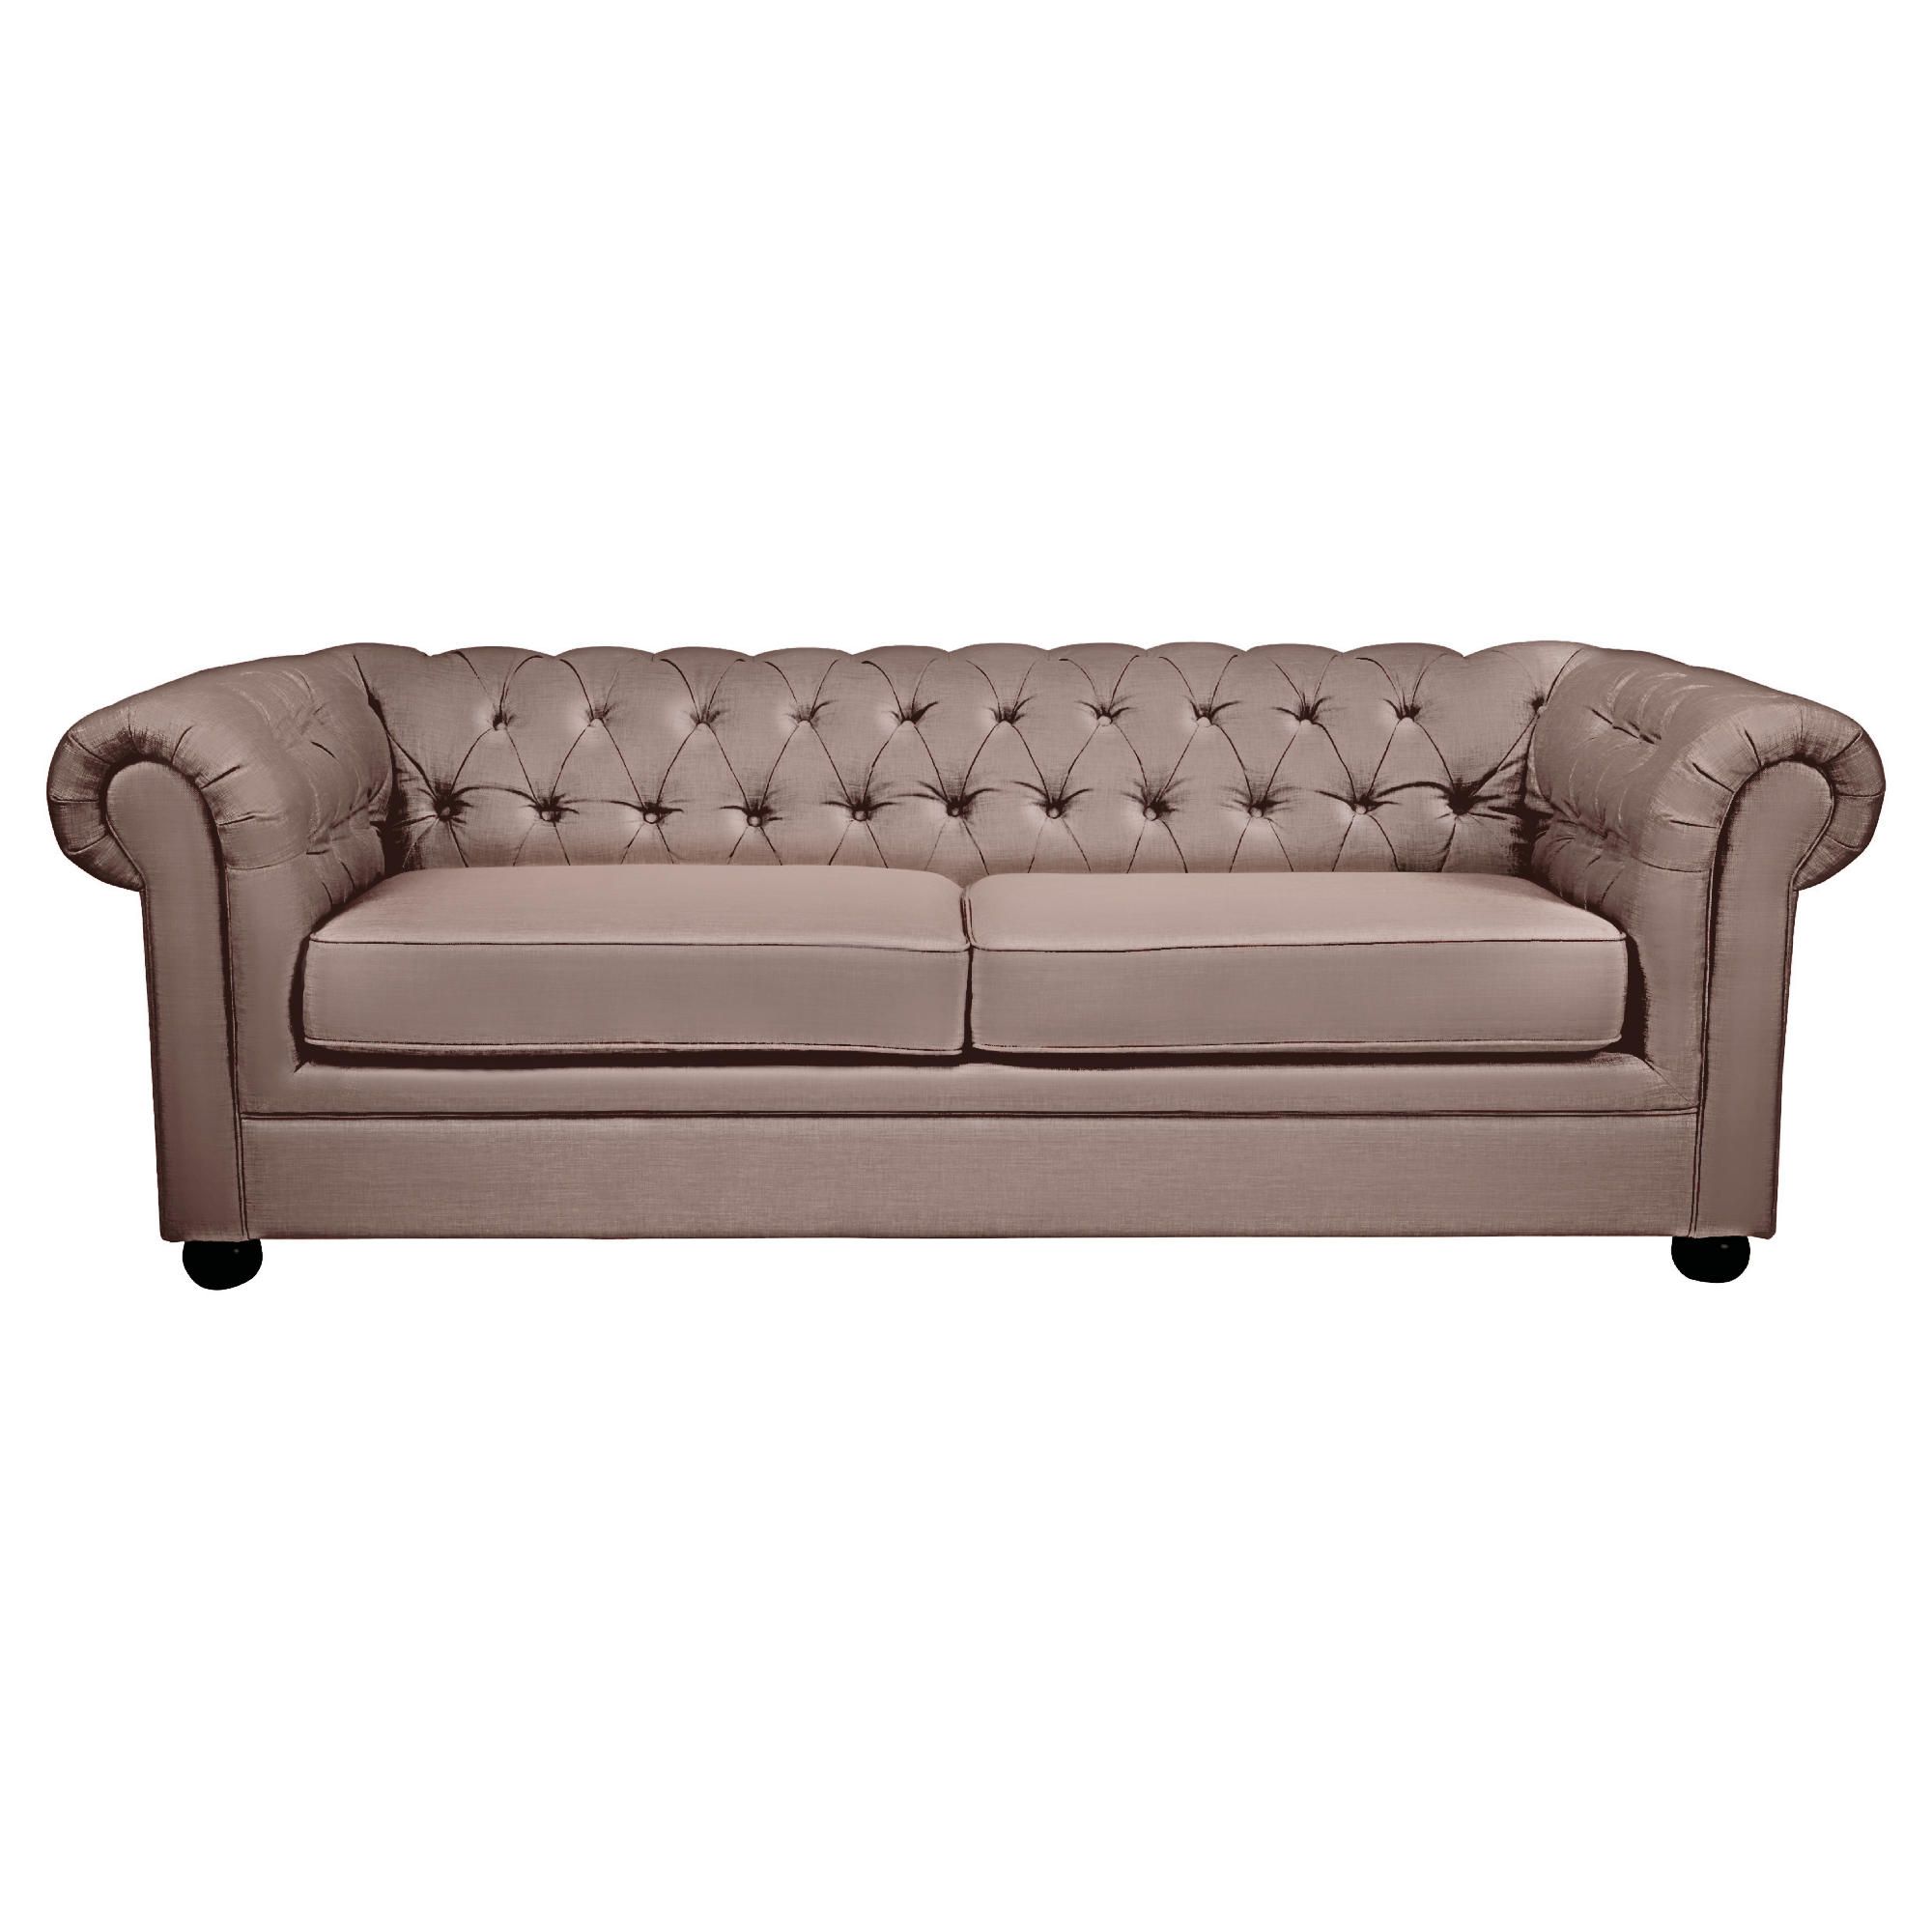 Chesterfield Velvet-effect Fabric Sofabed, Mink at Tesco Direct